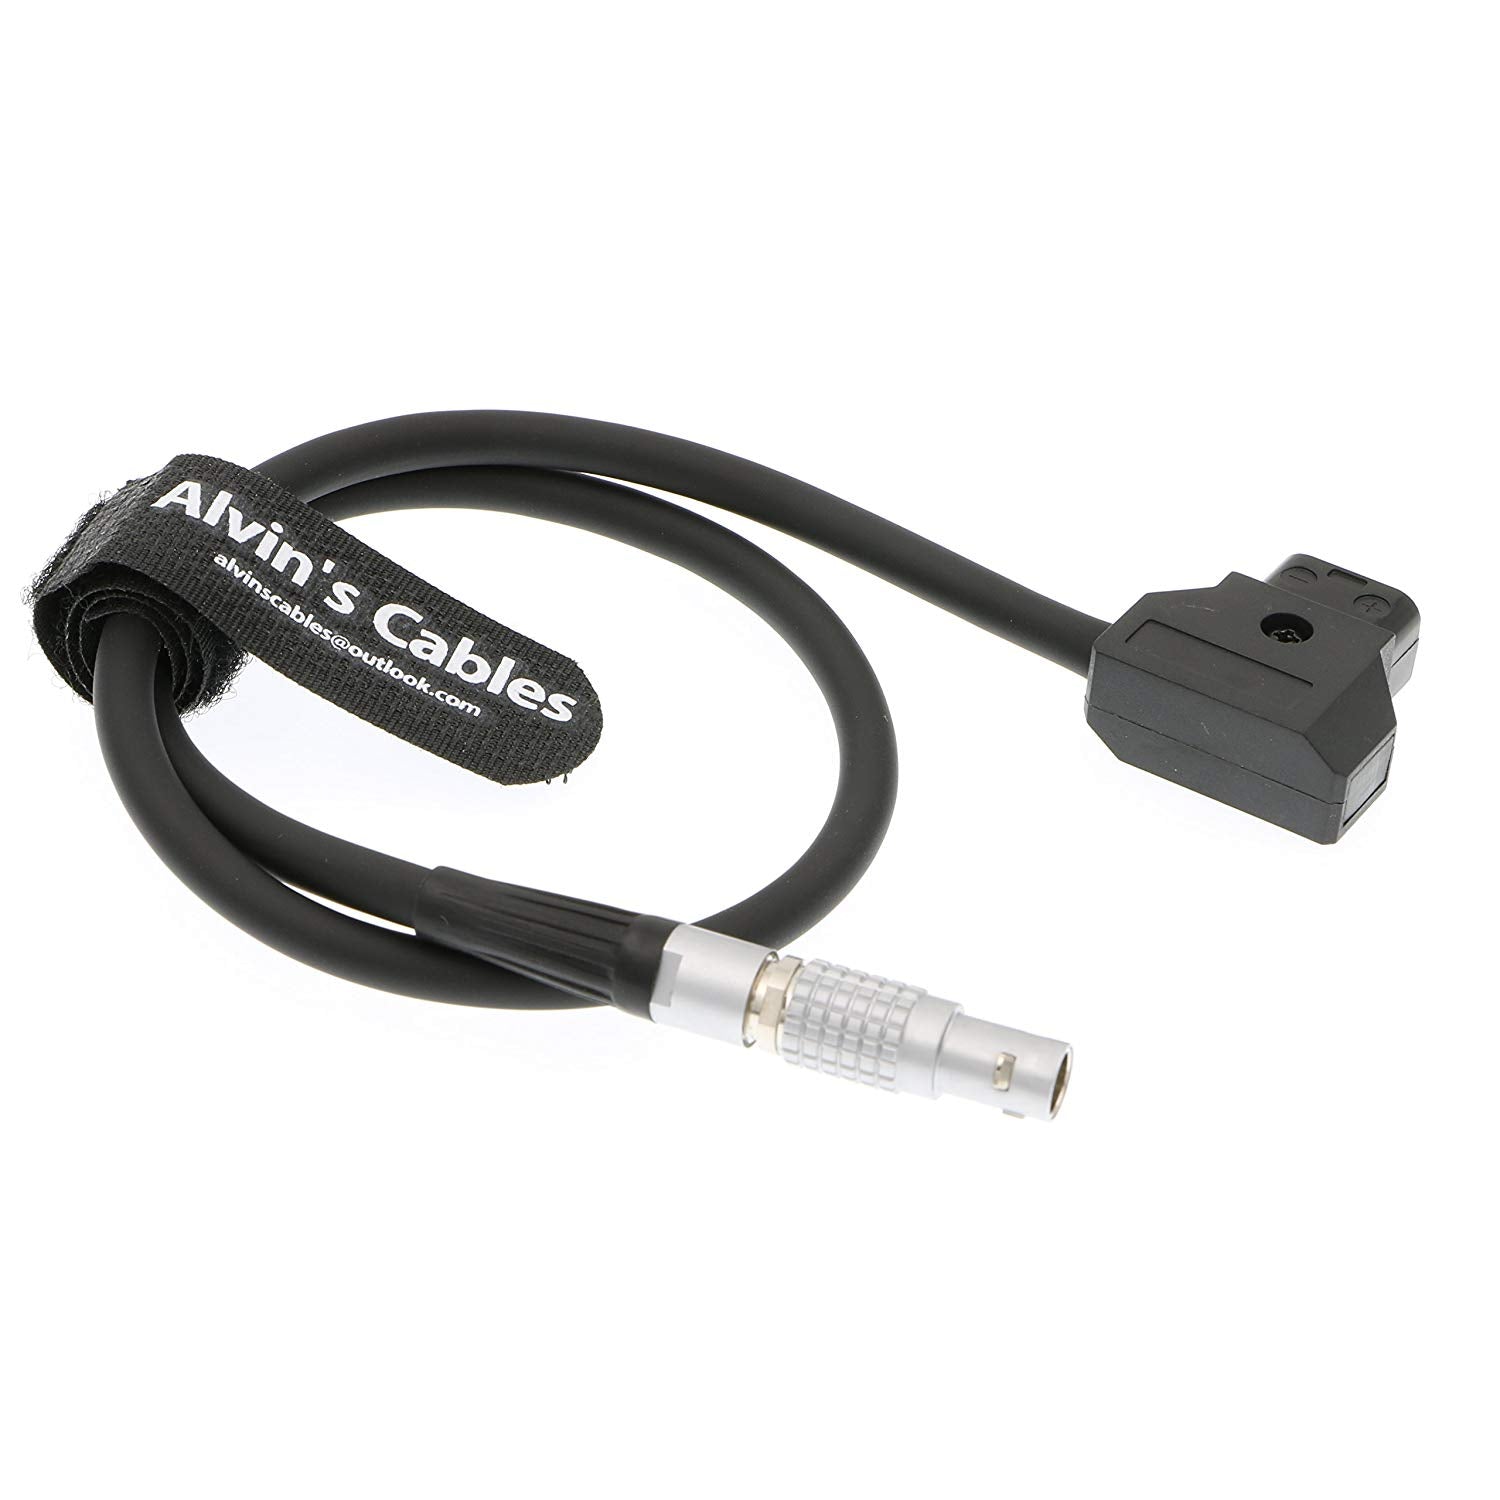 Alvin's Cables 2 Pin Male to D TAP Power Cable for Bartech Focus Device Receiver Artemis Letus Redrock Hedén Steadicam